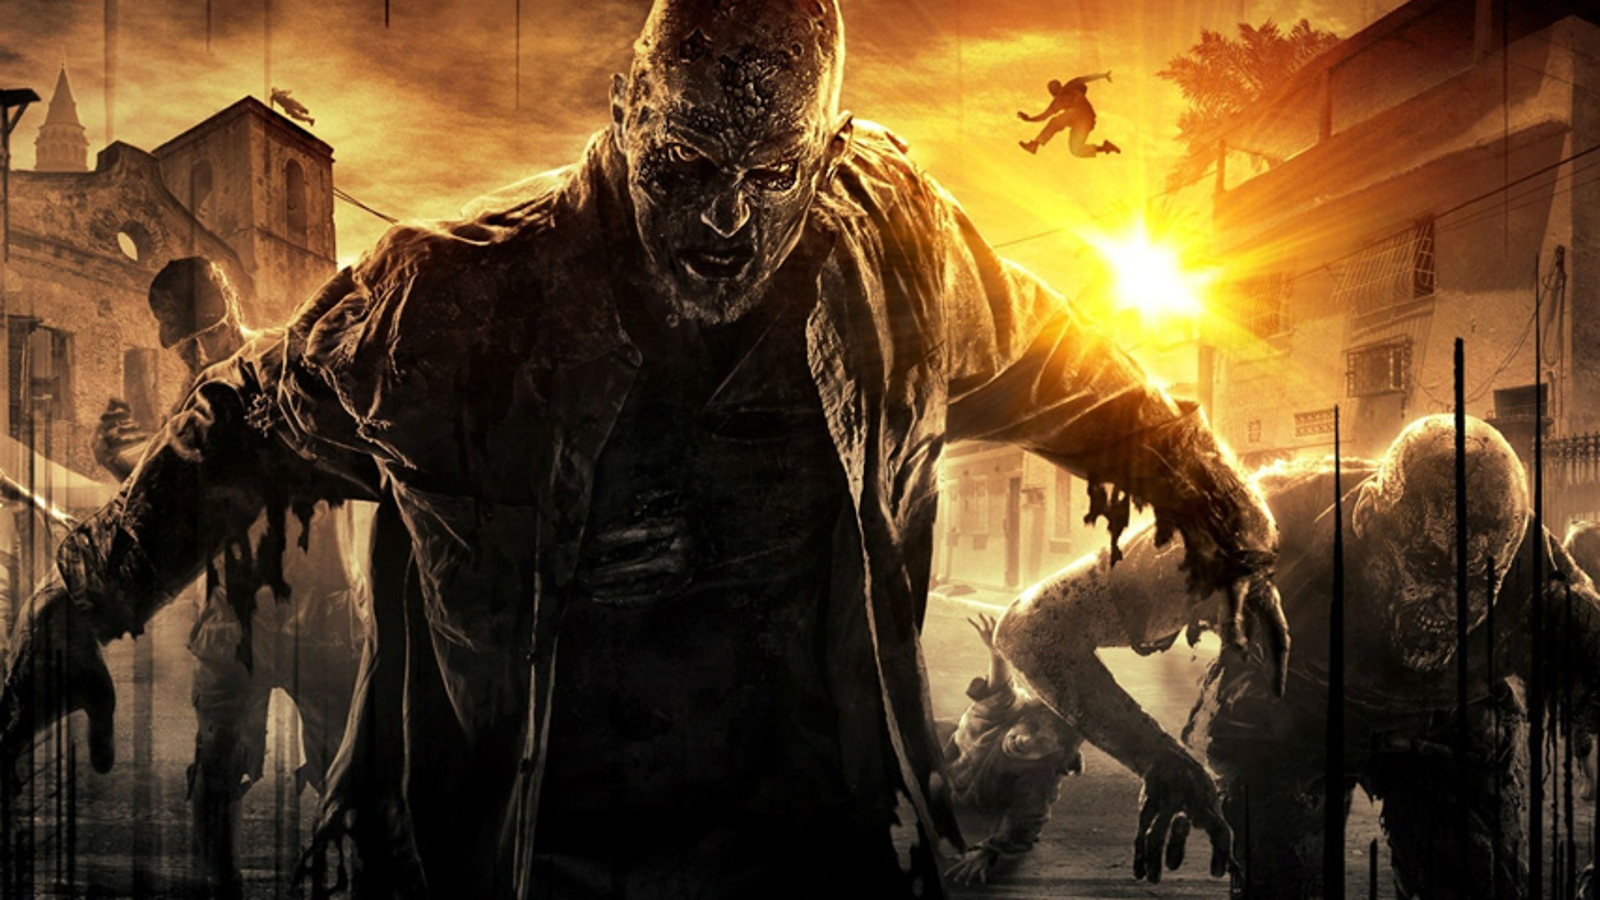 Dying Light 2 Stay Human review: Surviving on the edge